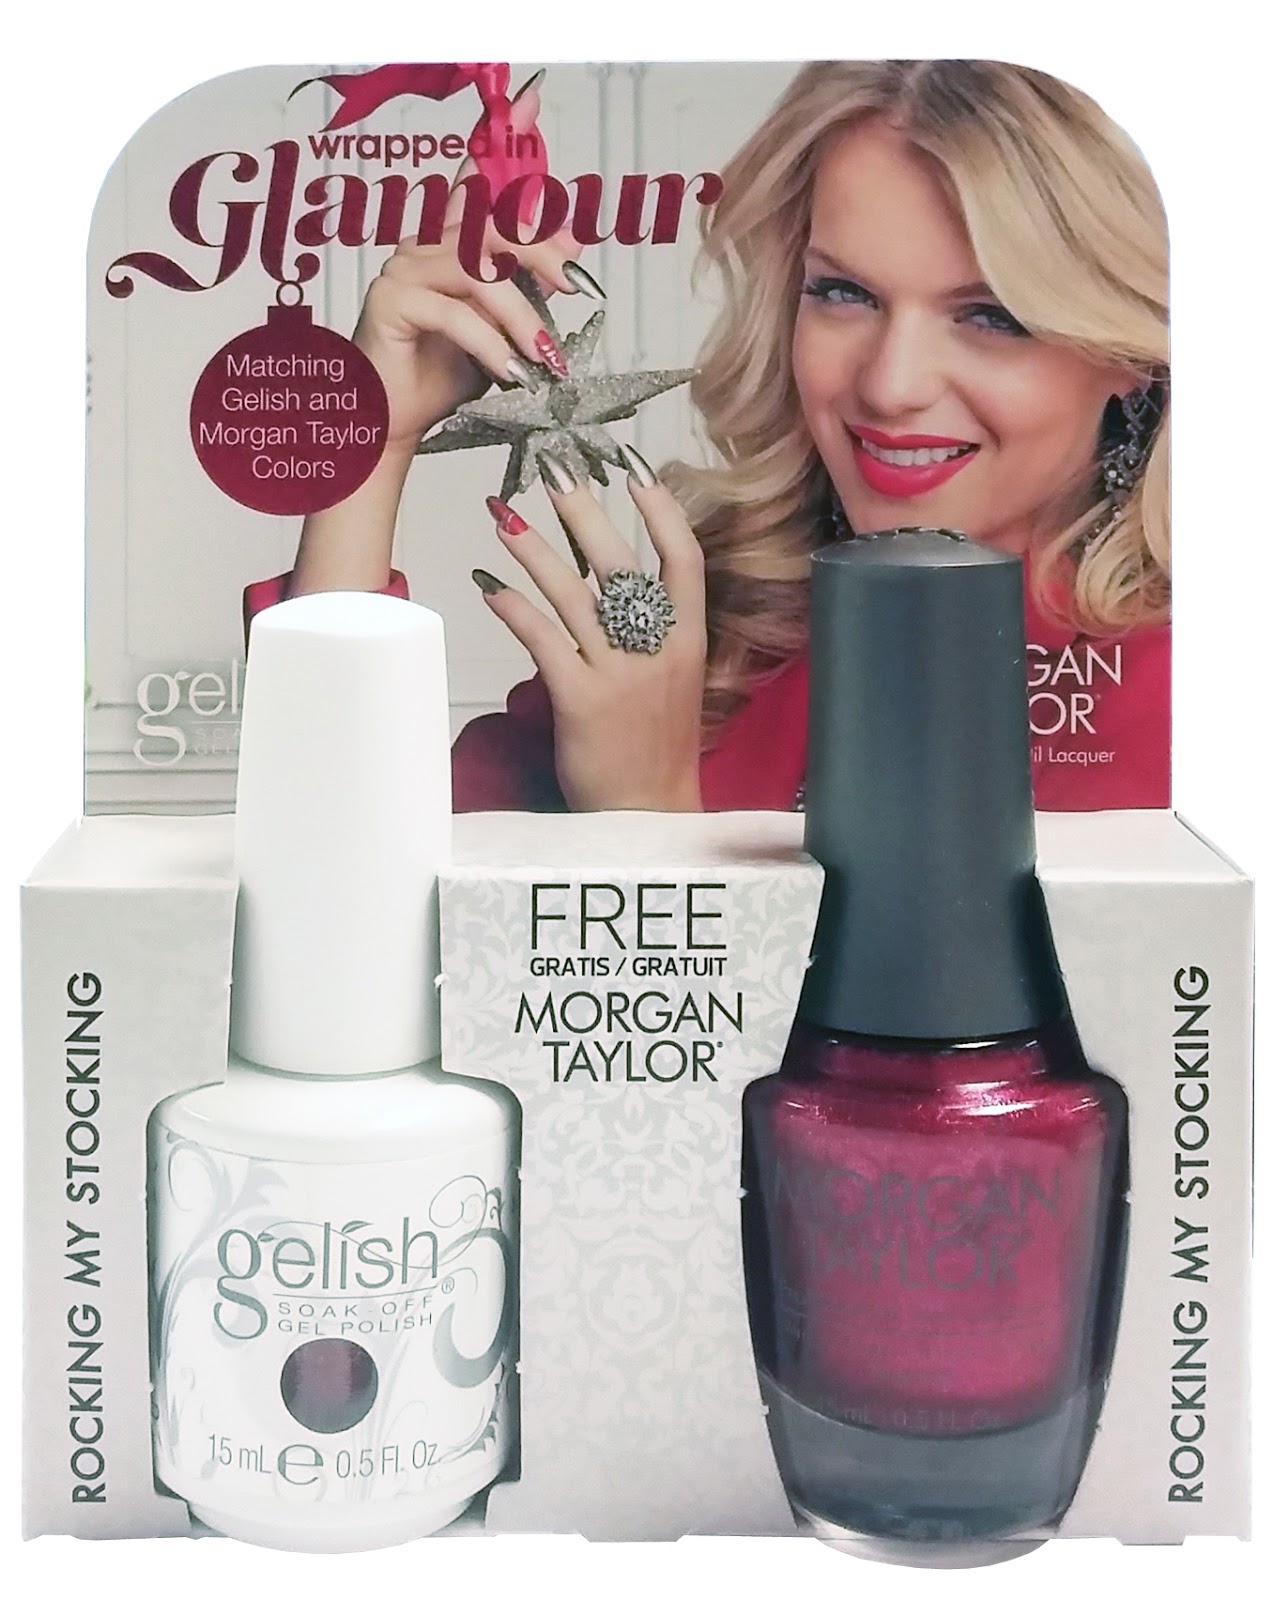 HARMONY GELISH Holiday 2016 Wrapped In Glamour Collection - TuongVyLaLa